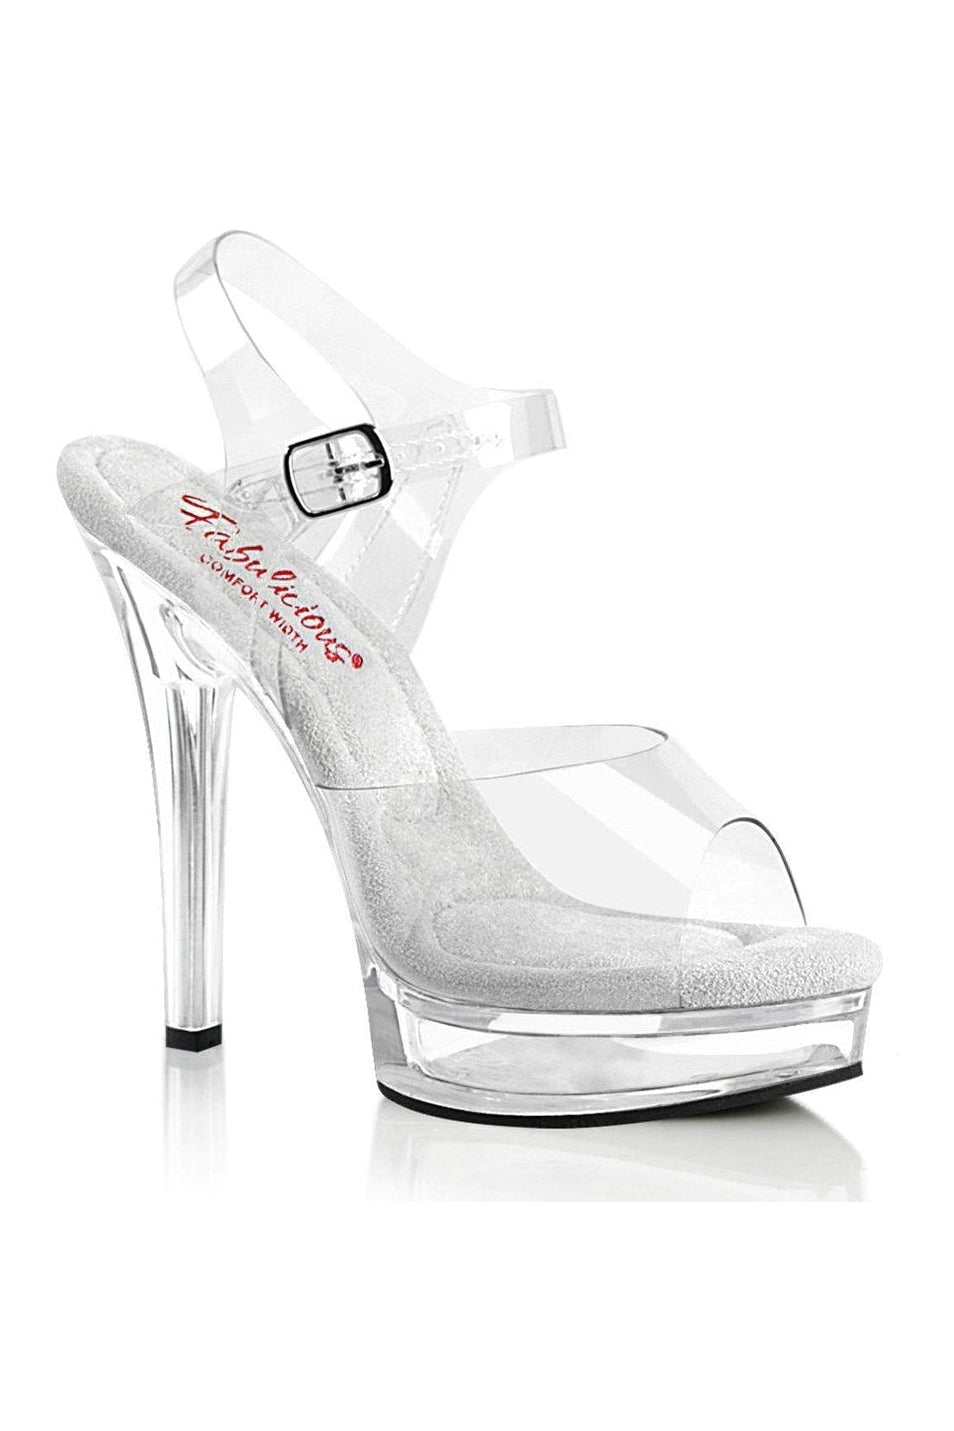 MAJESTY-508 Sandal | Clear Vinyl-Sandals-Fabulicious-Clear-6-Vinyl-SEXYSHOES.COM